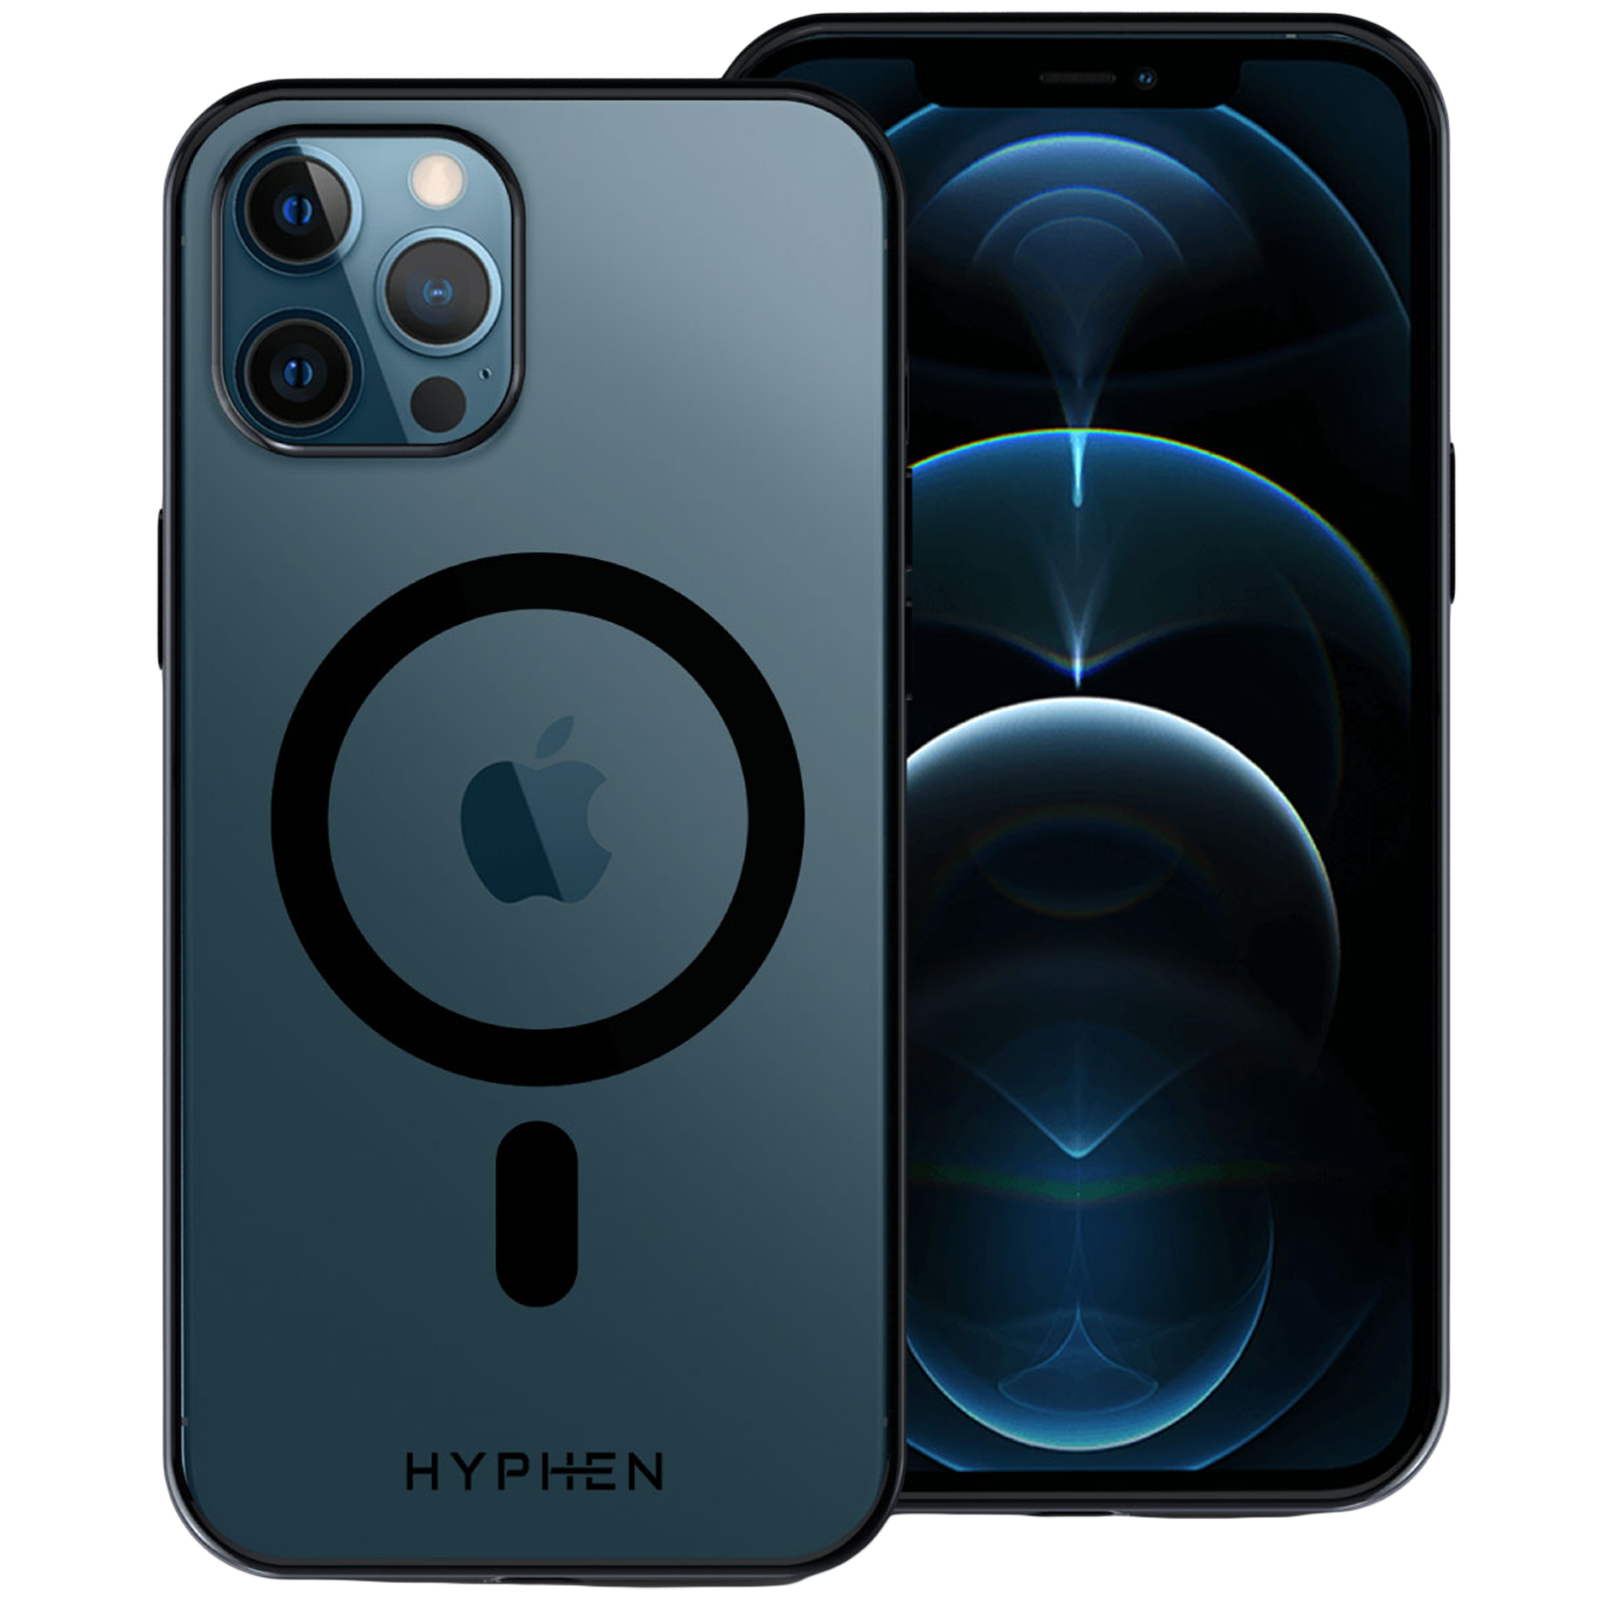 HYPHEN Aire Polycarbonate Back Cover for Apple iPhone 12 Pro Max (Wireless Charging Compatible, Black)